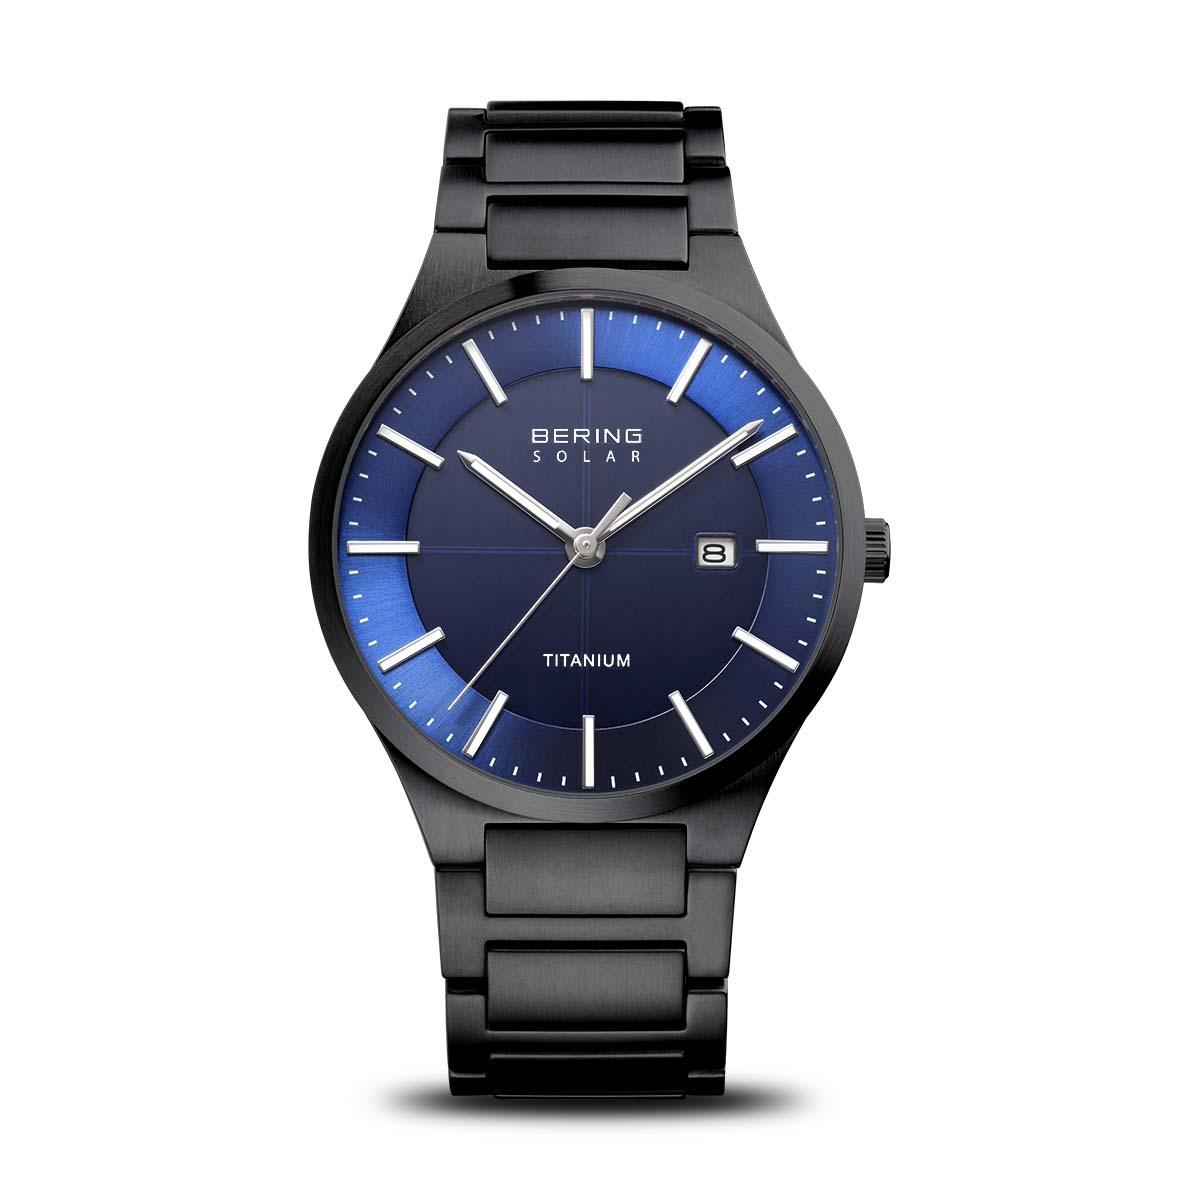 Bering Gents Black Plated Titanium Solar Powered Watch with Blue Dial and Date Window 15239-727 - Judith Hart Jewellers